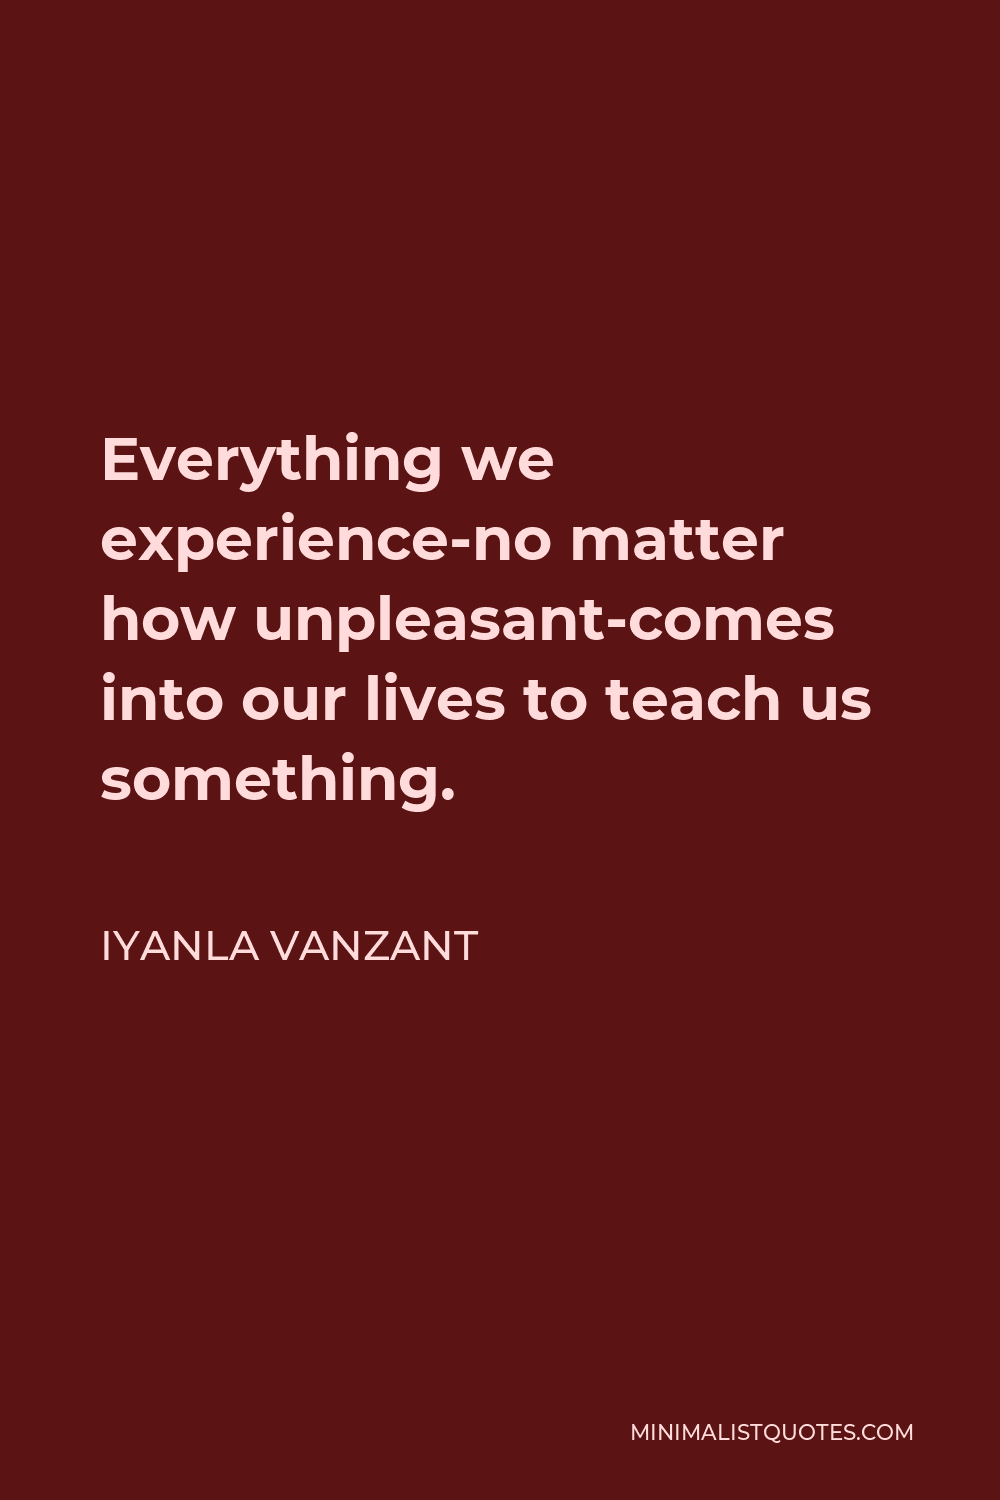 Iyanla Vanzant Quote - Everything we experience-no matter how unpleasant-comes into our lives to teach us something.